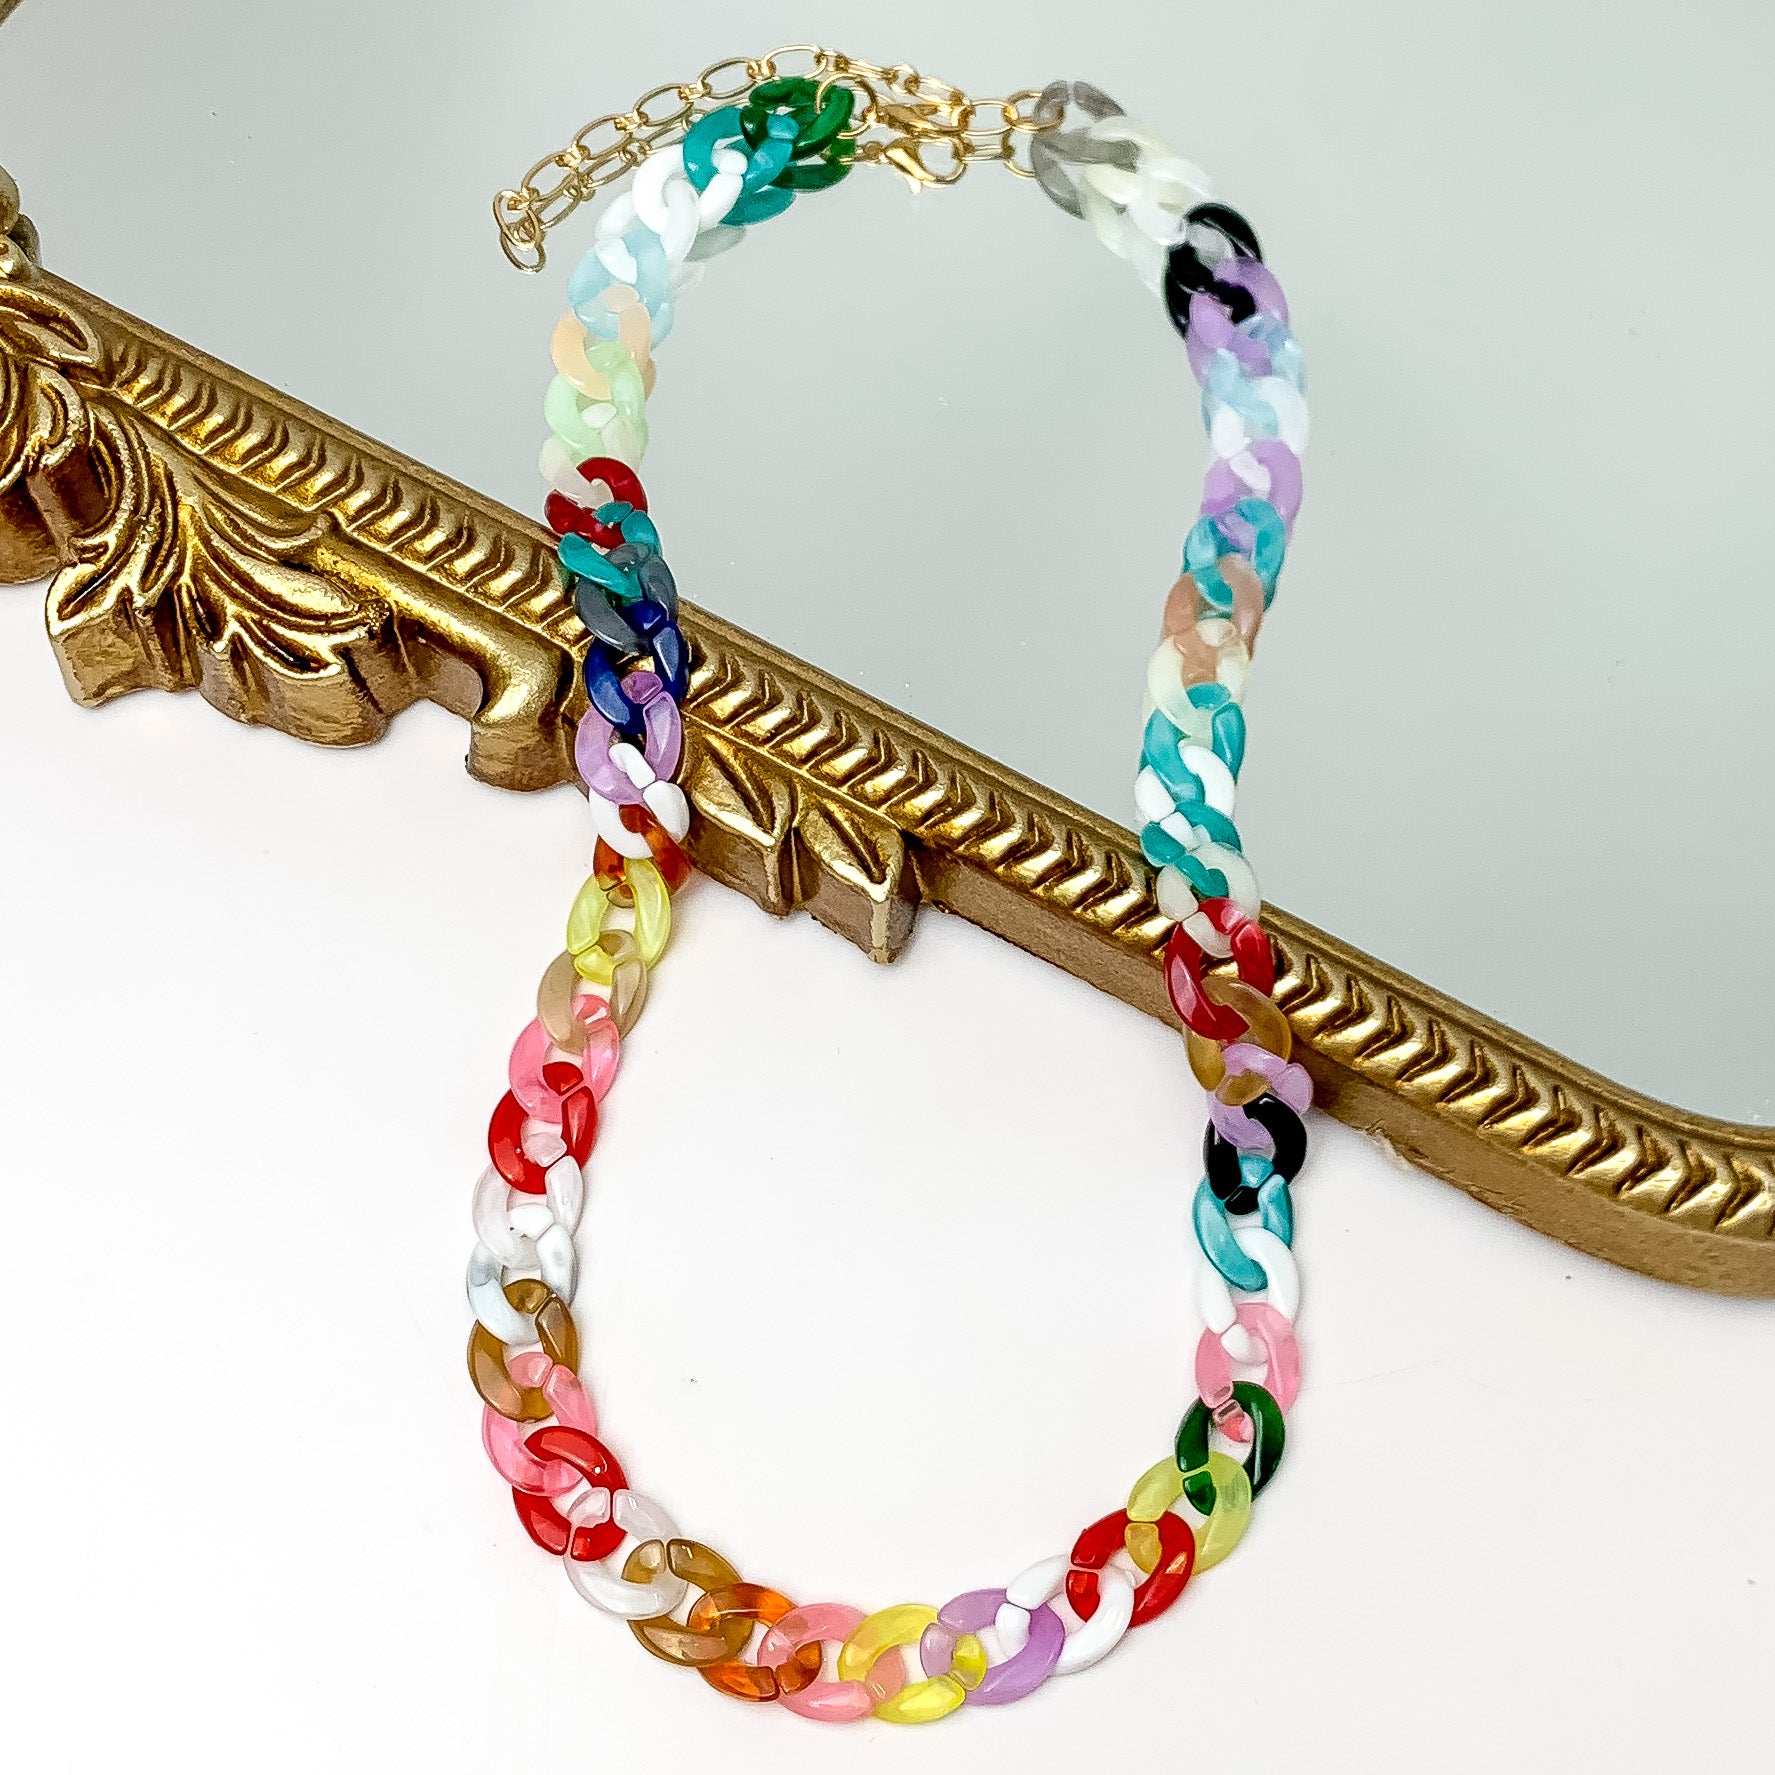 Pictured partially on a gold mirror on a white background is a chain link necklace in multicolor. This necklace includes pinks, blues, reds, and white. 